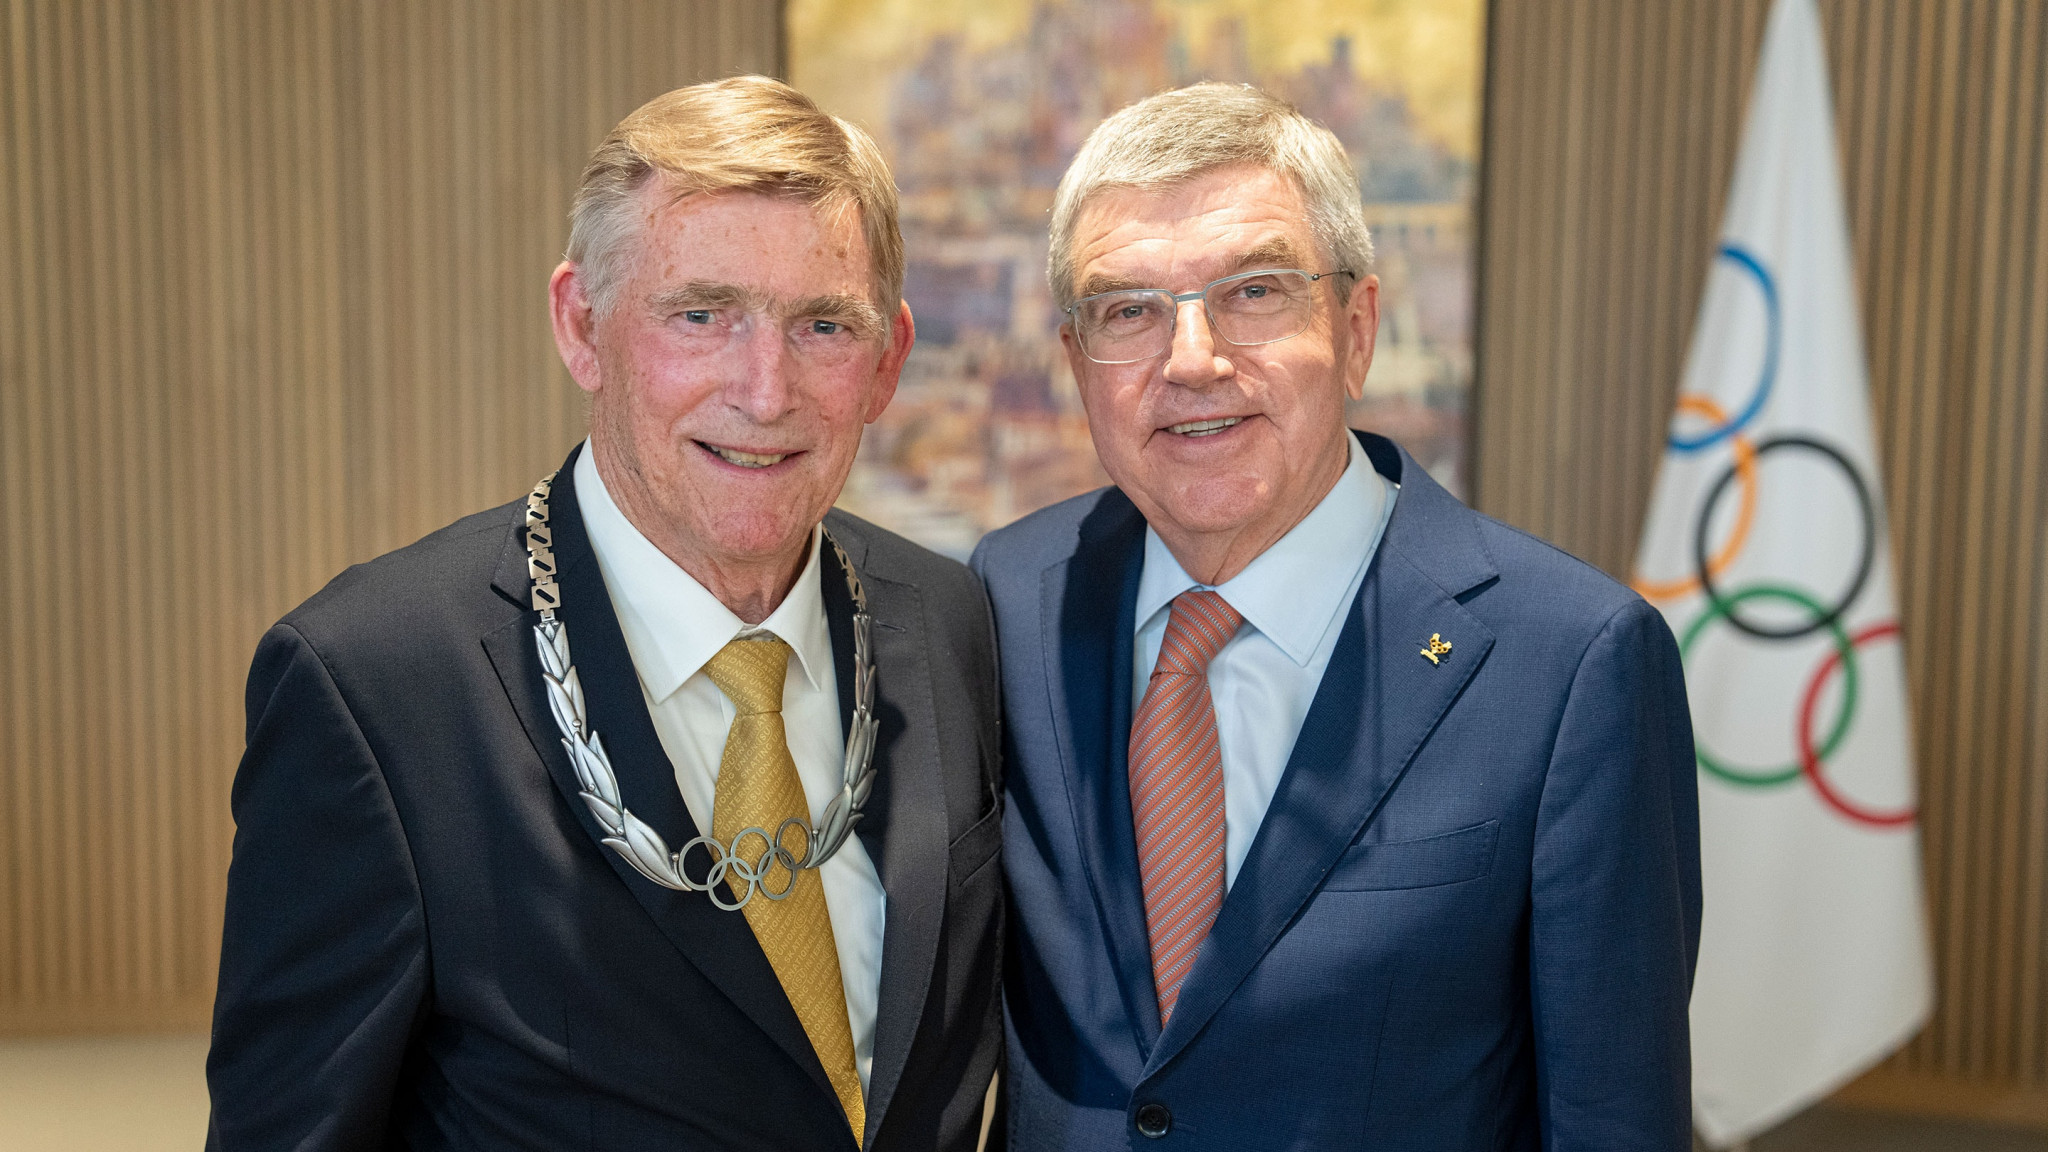 Jan Dijkema, left, has been presented with the Olympic Order ©IOC